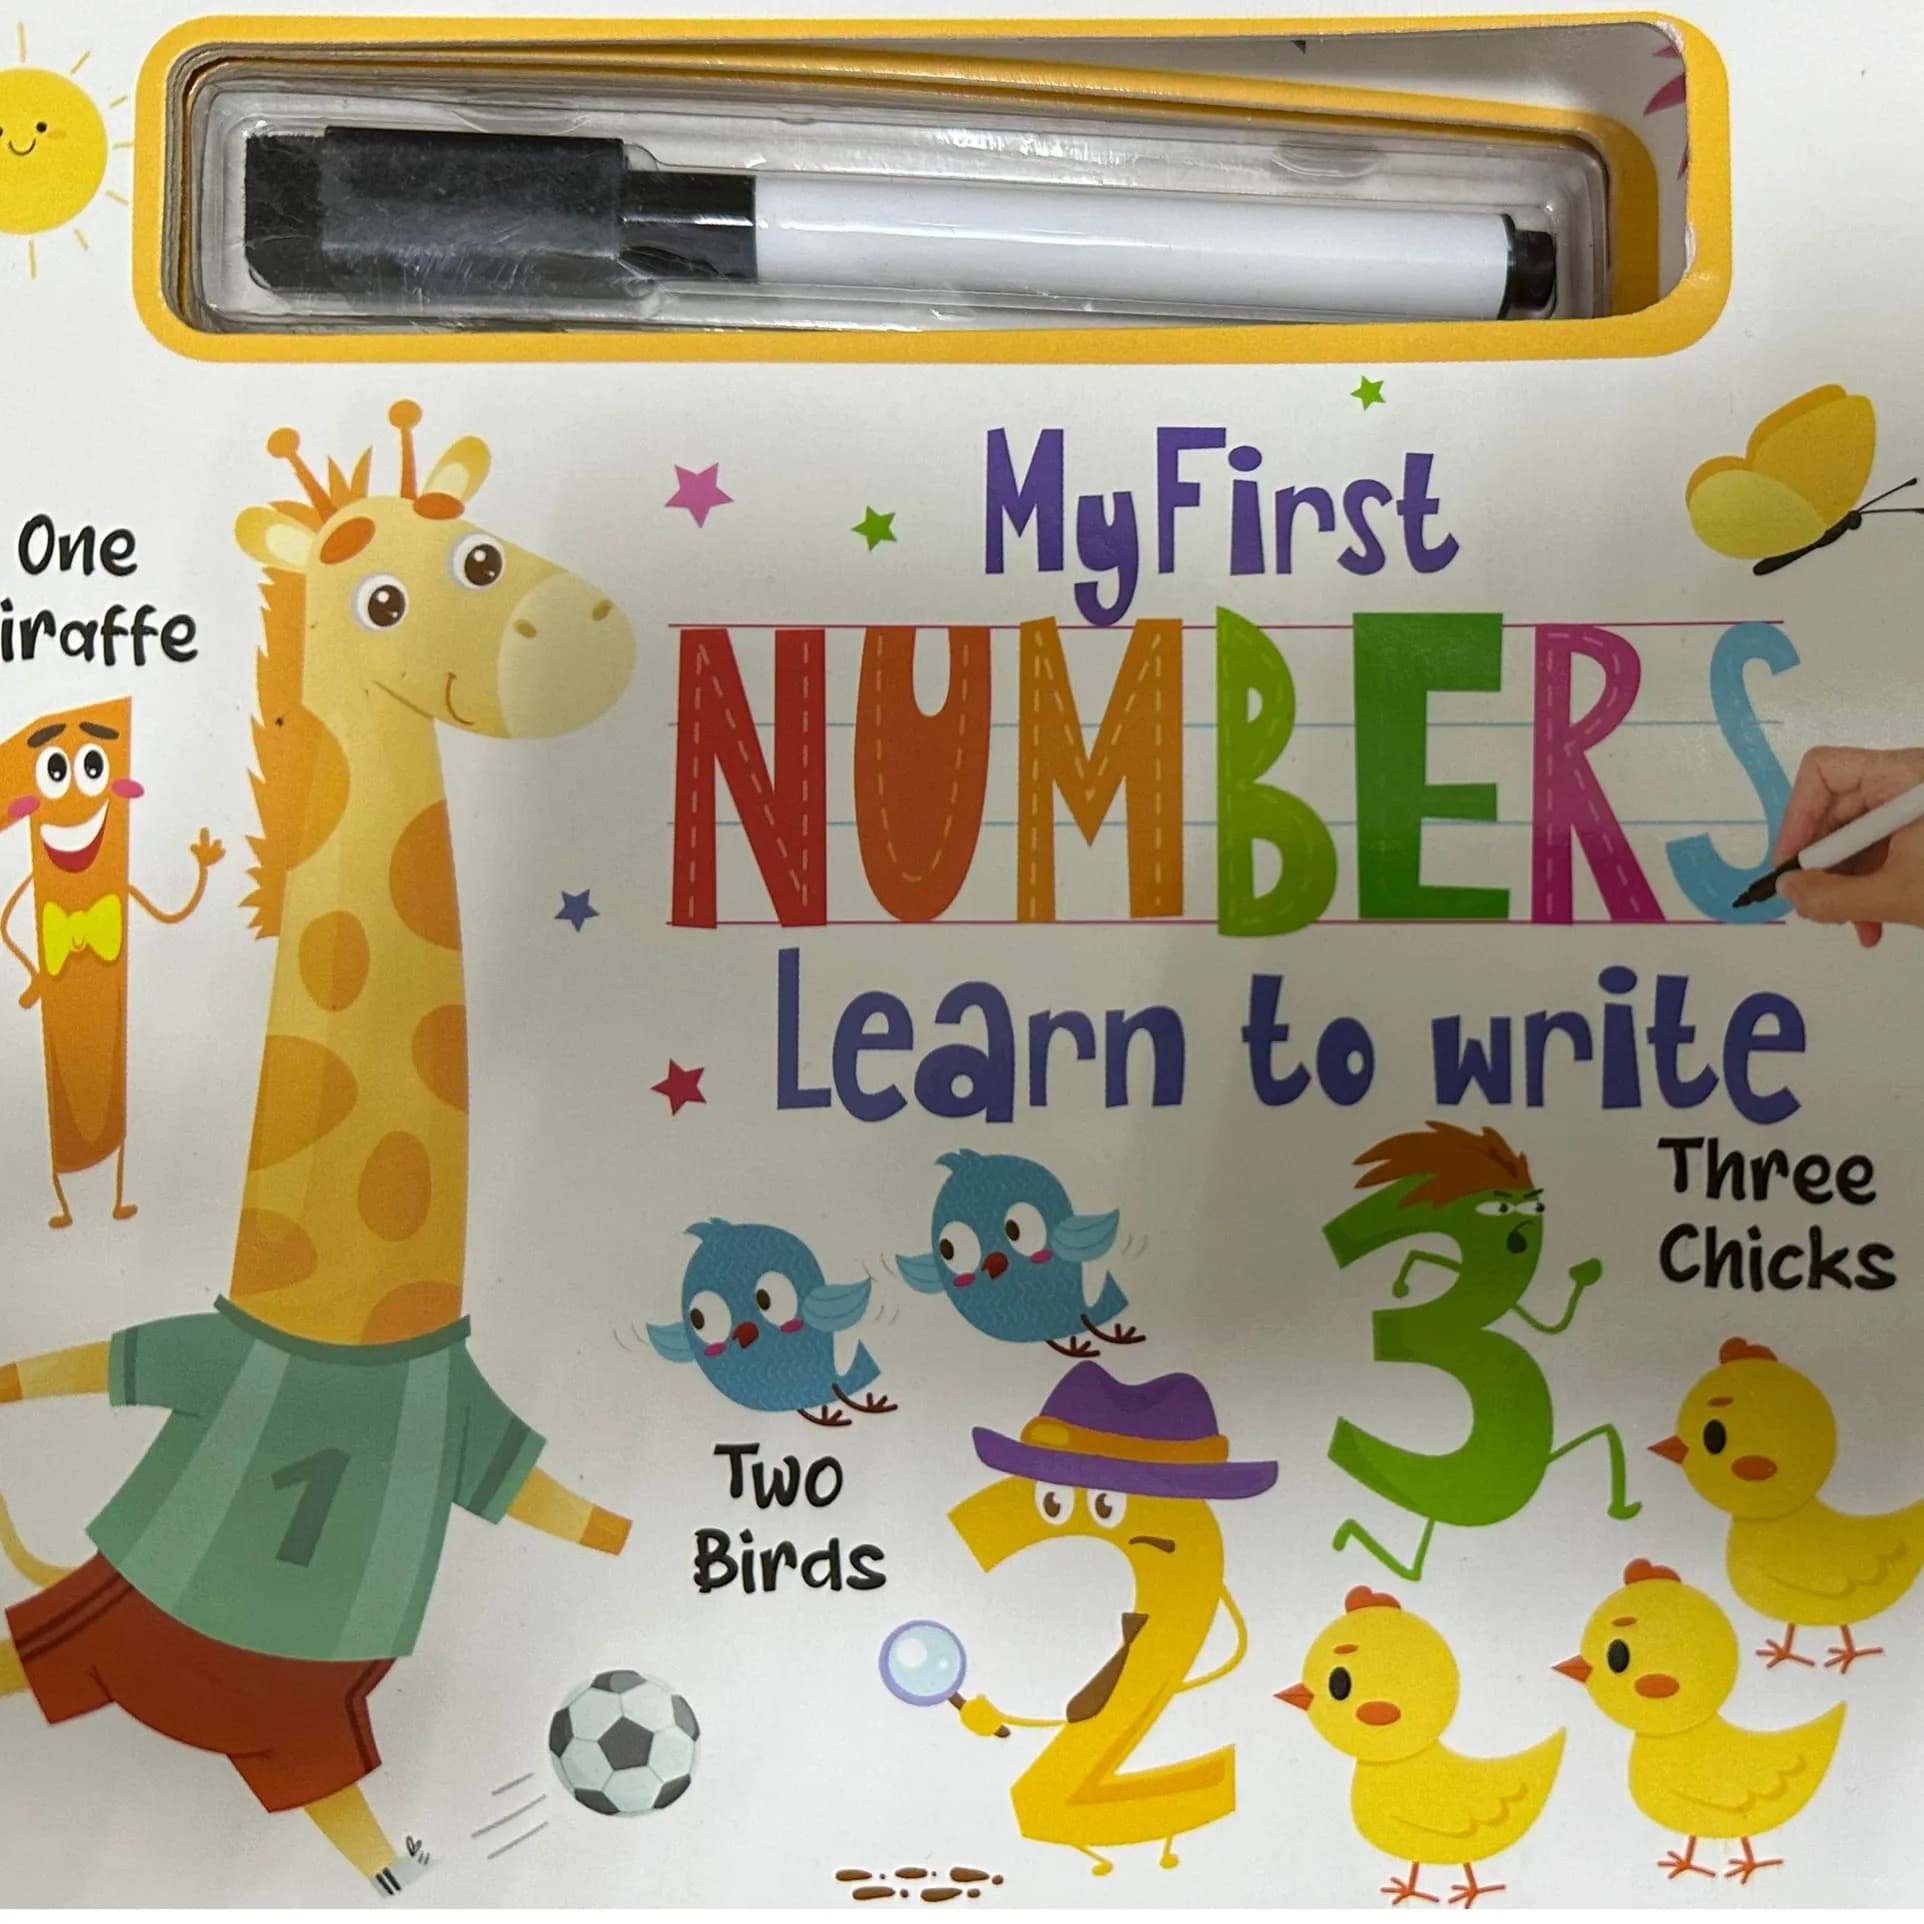 MY FIRST NUMBER - LEARN TO WRITE